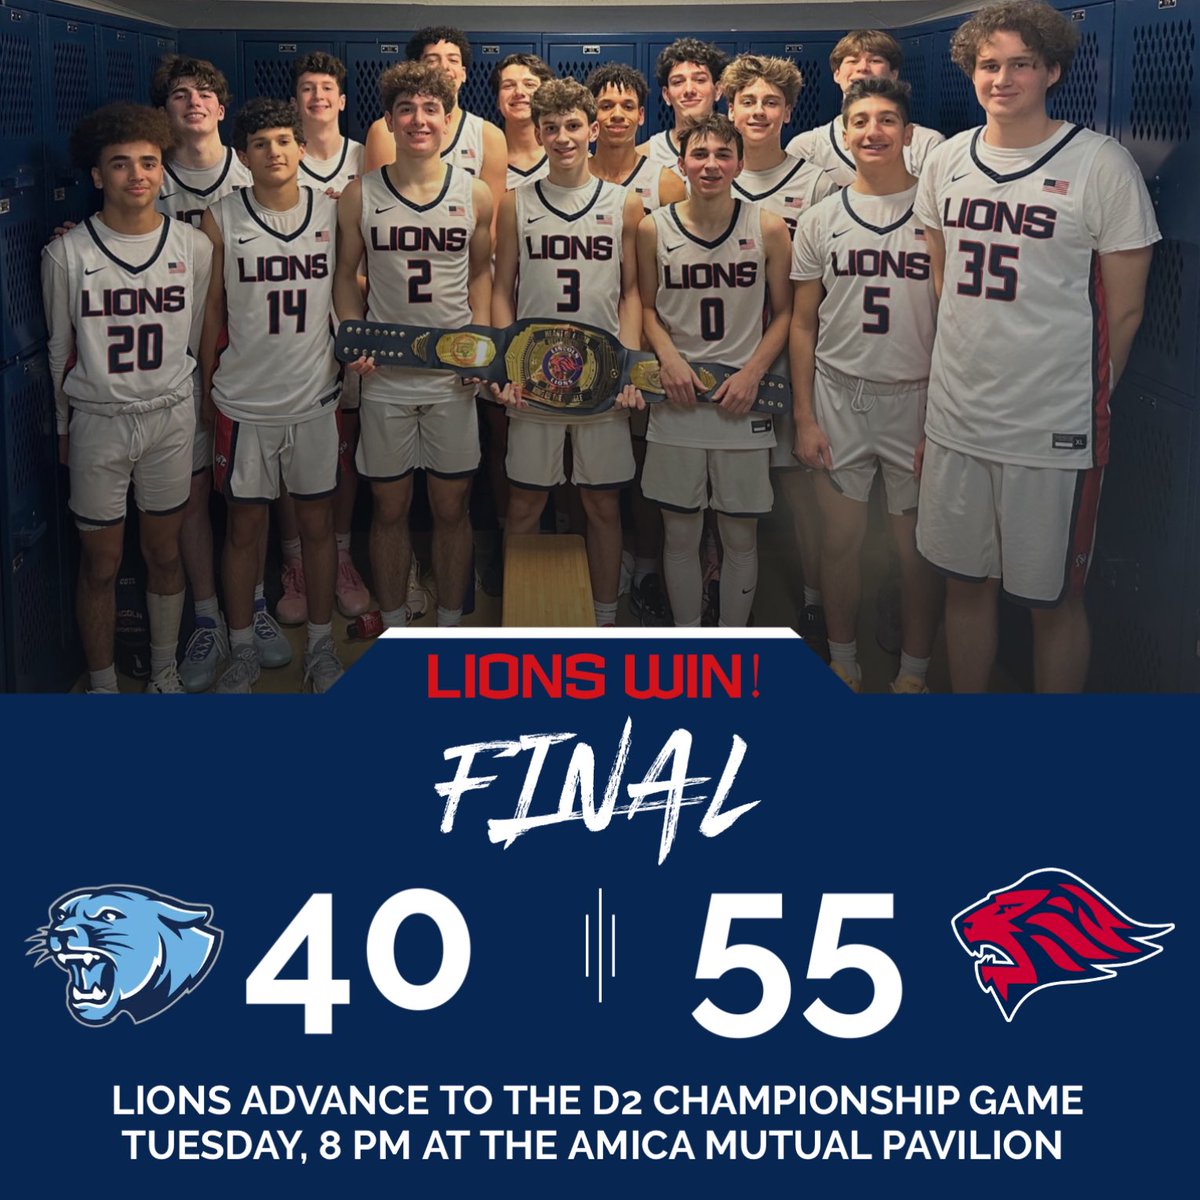 Final: Lincoln 55, Johnston 40‼️

Lions advance to the D2 State Championship game behind a complete team defensive effort.

⌚️8:00 PM
📅 Tuesday, March 5th
📍Amica Mutual Pavilion 

@LHSRI_Athletics | @RibcaBasketball